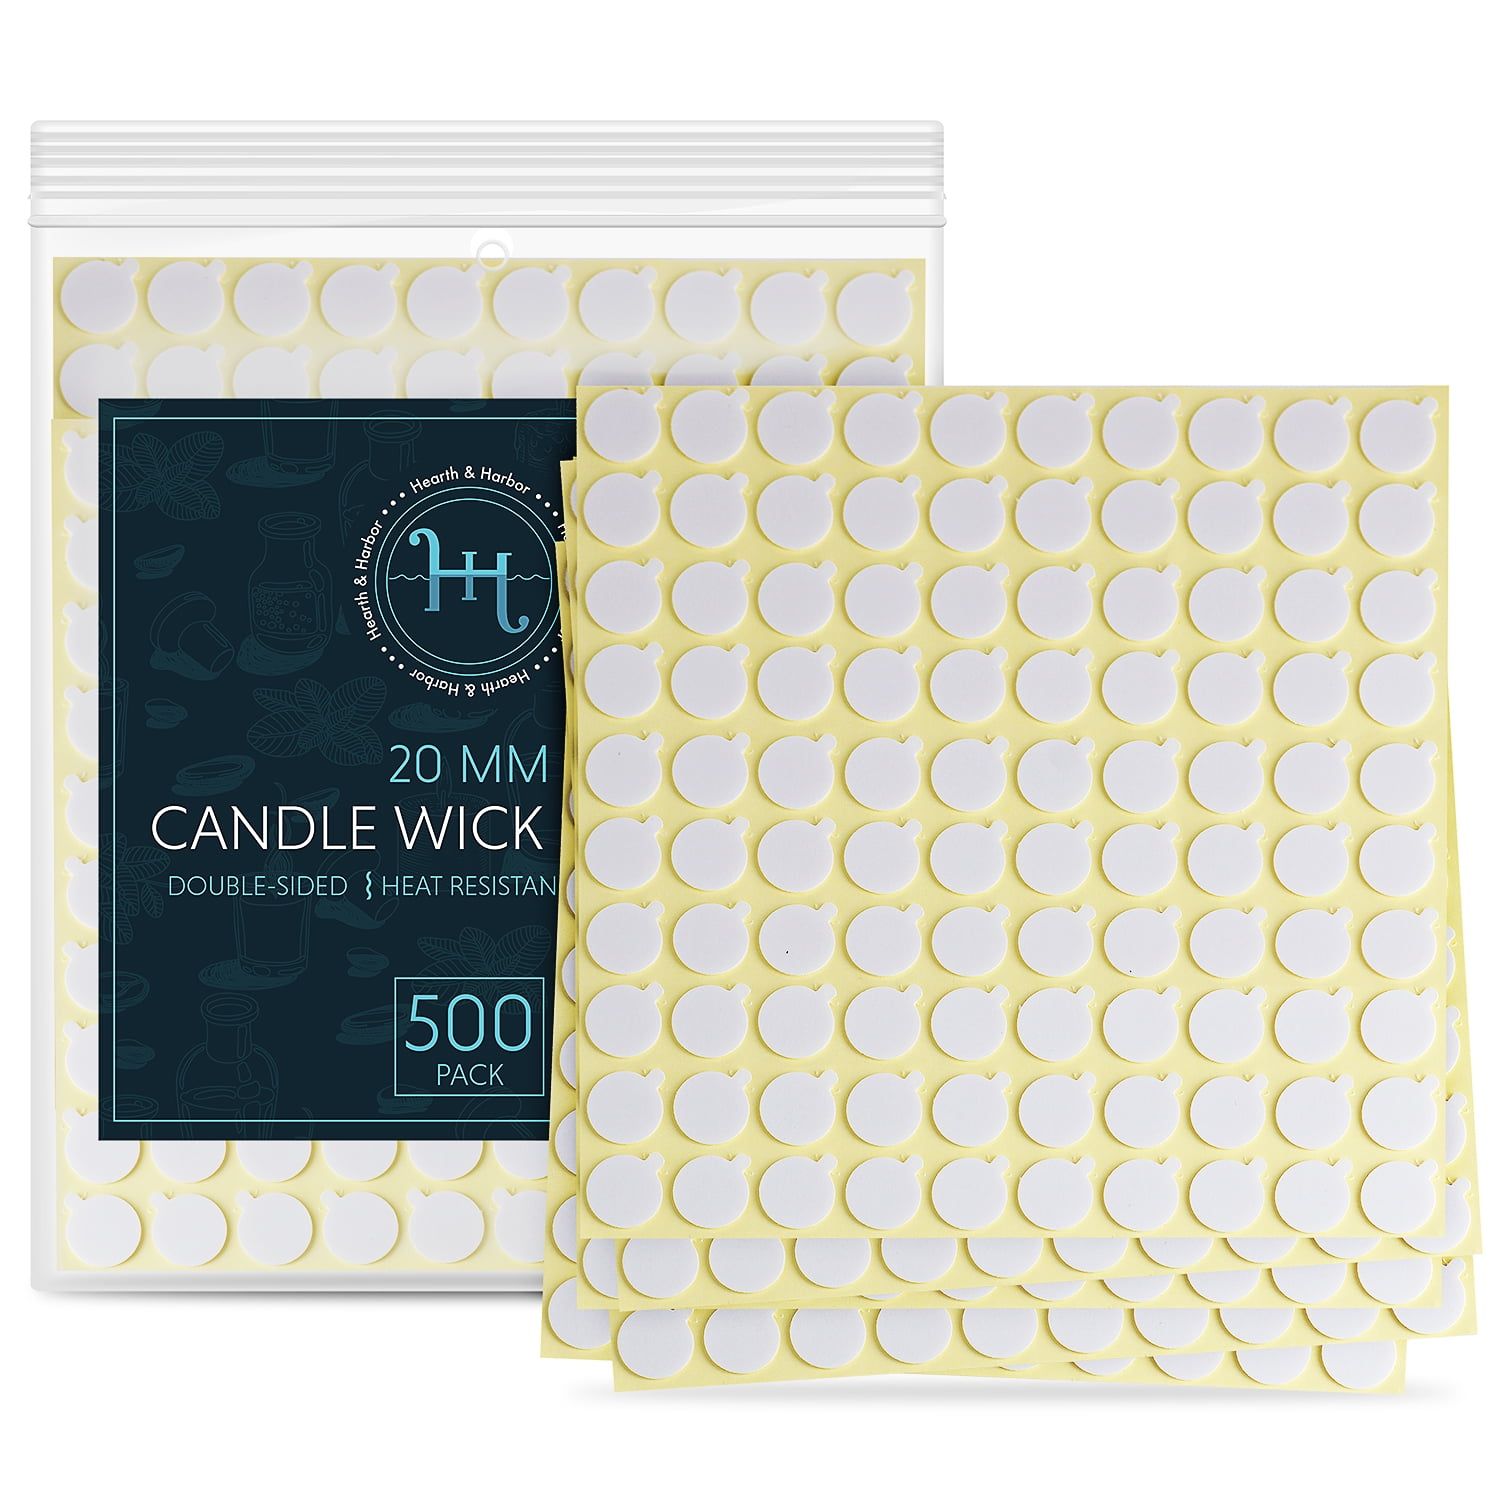 Candle Wick Sticker - High Viscosity Heat Resistance Double Sided